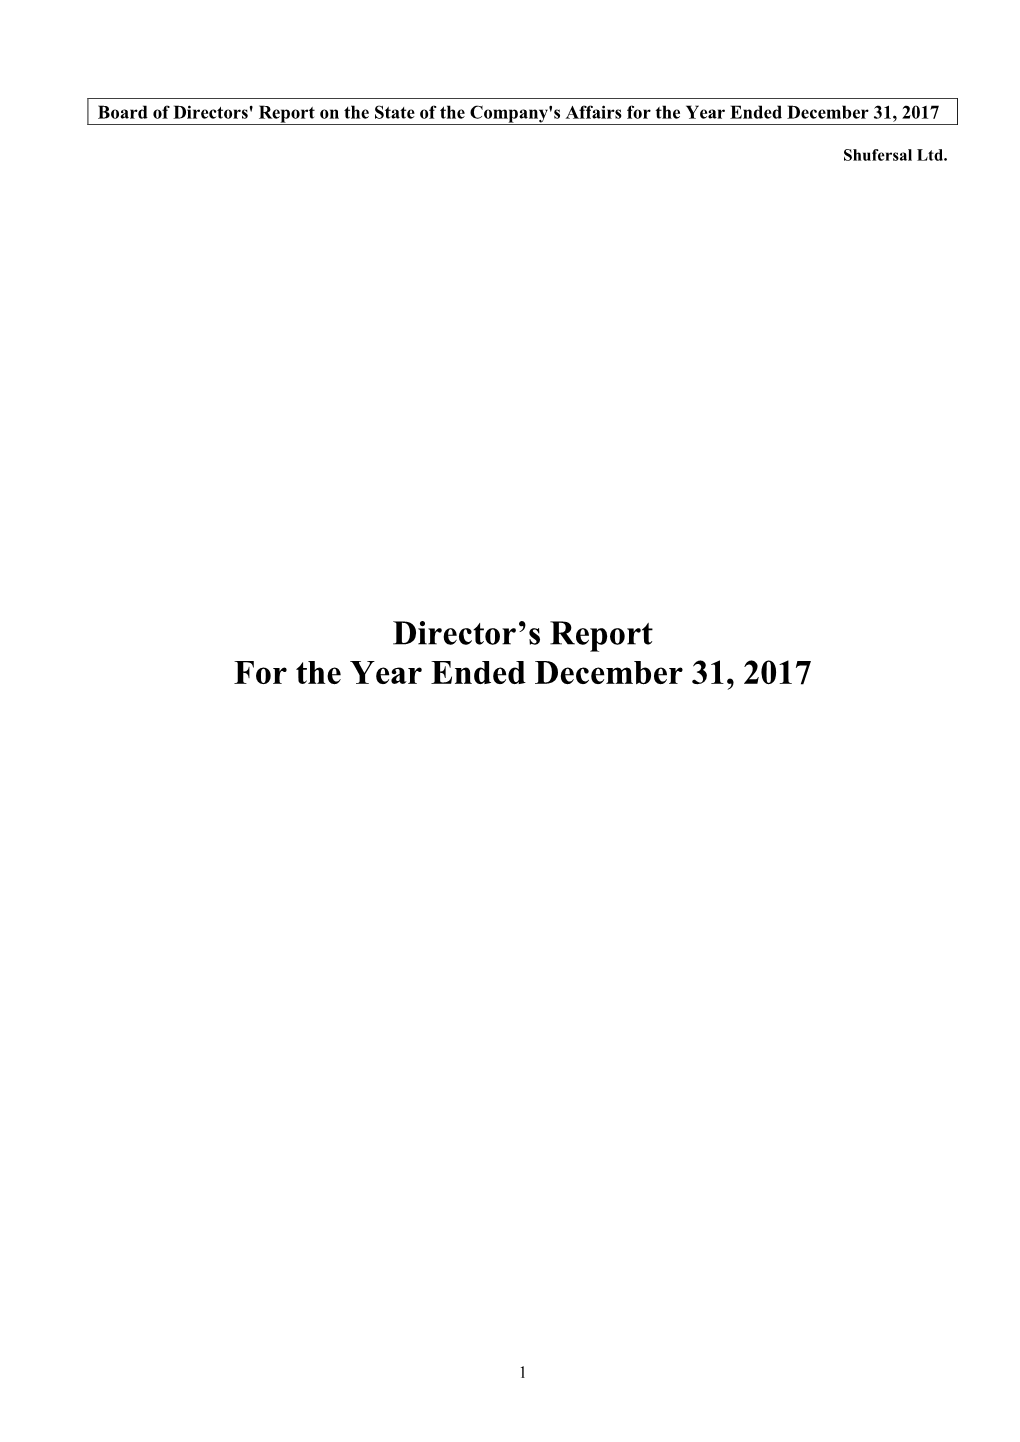 Director's Report for the Year Ended December 31, 2017